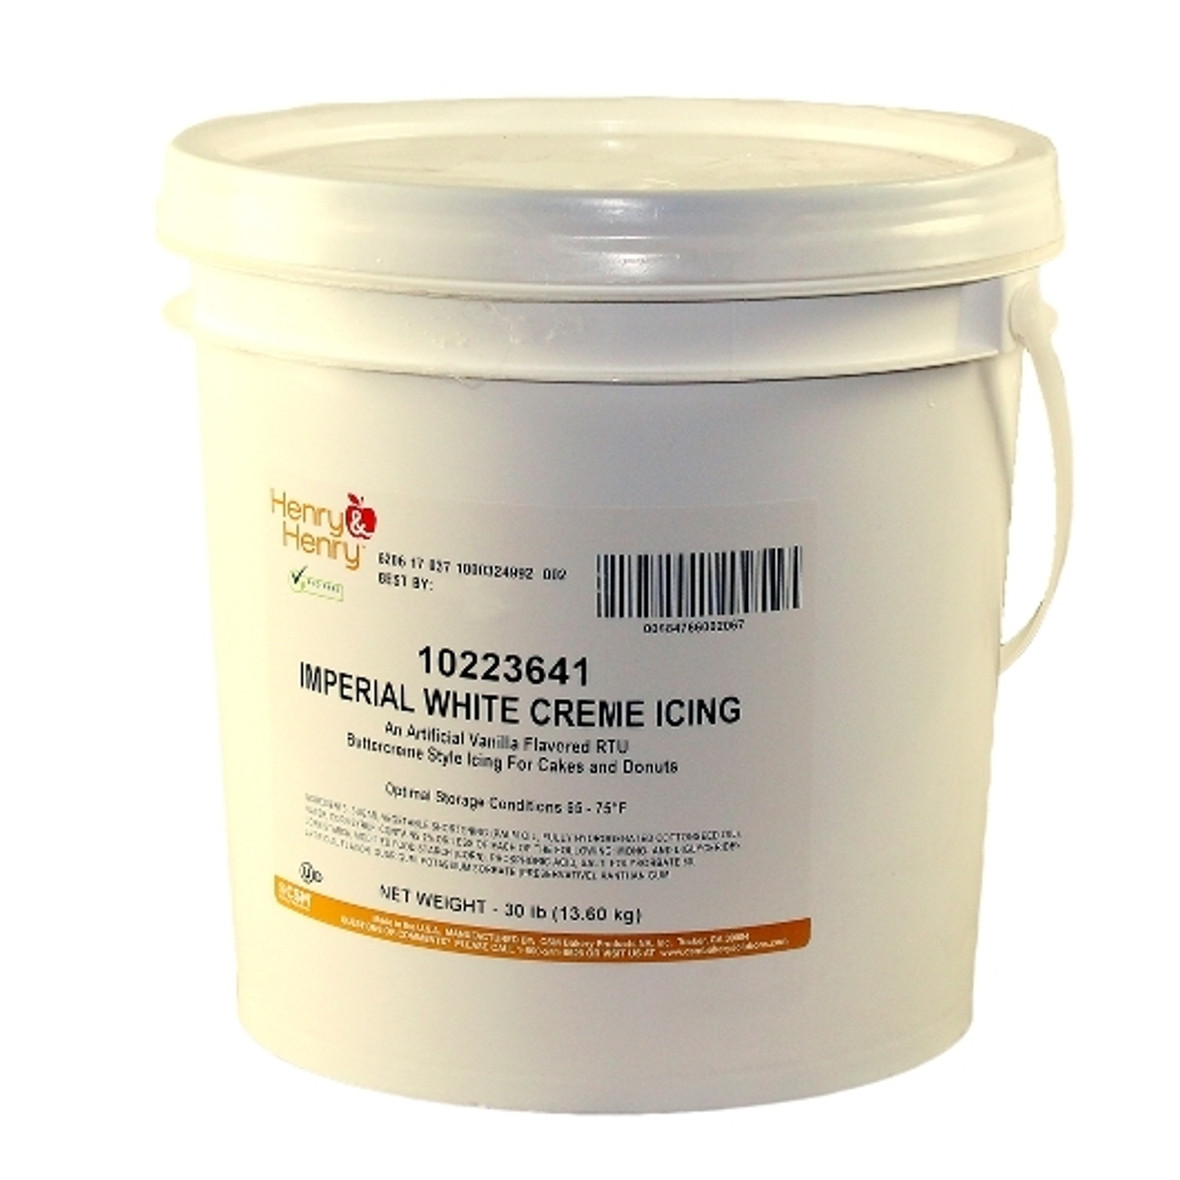 Henry and Henry Imperial White Cream Icing, 30 Pounds